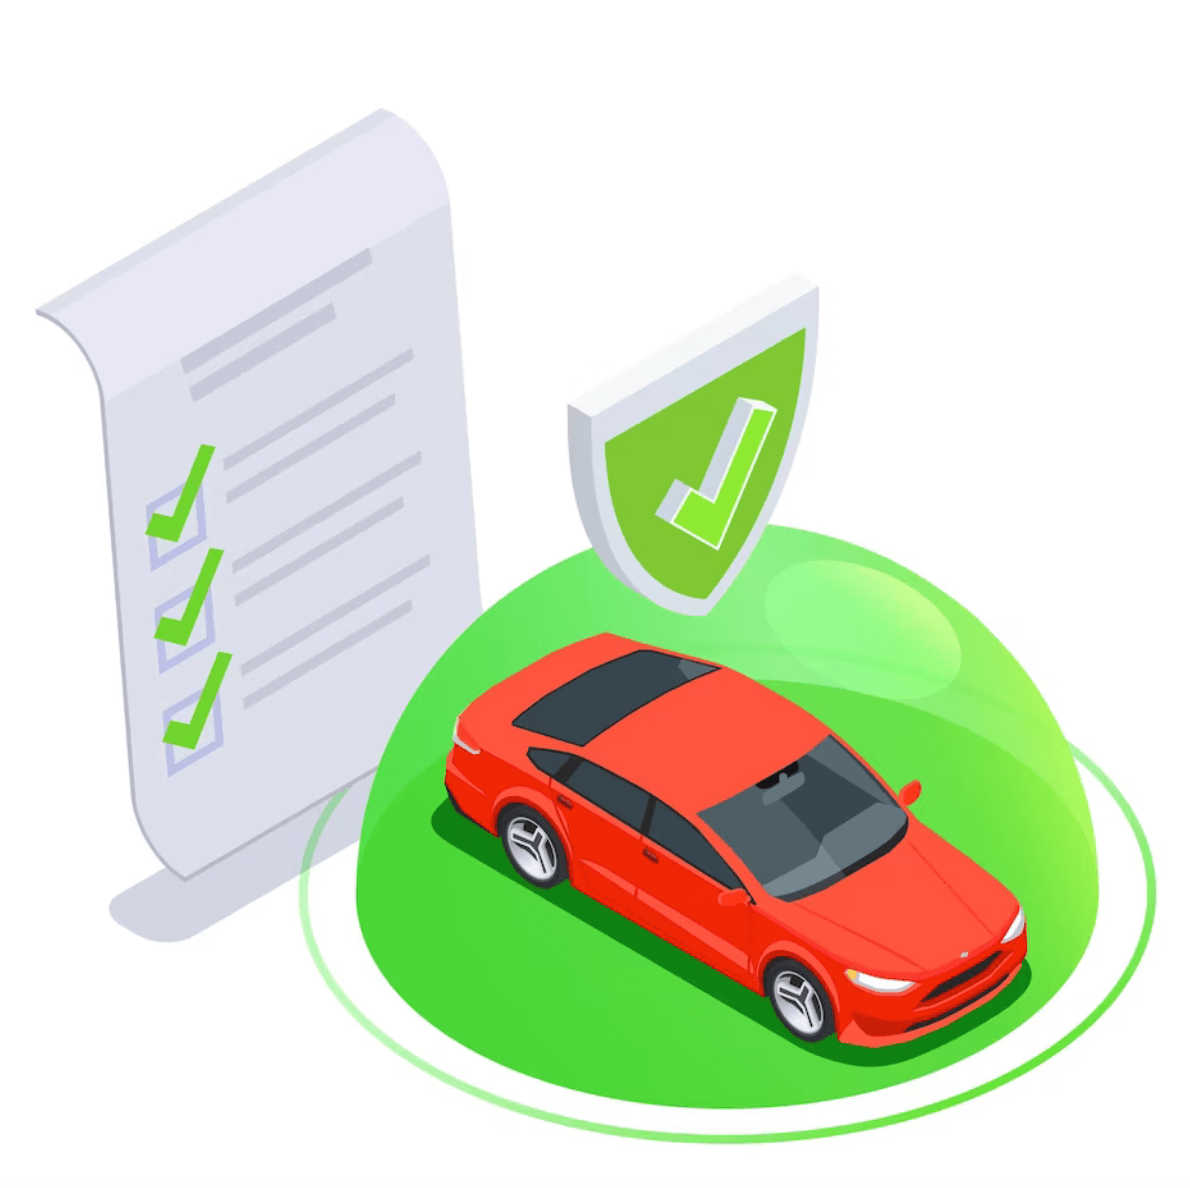 How to Insure Your Vehicle or Car in Storage